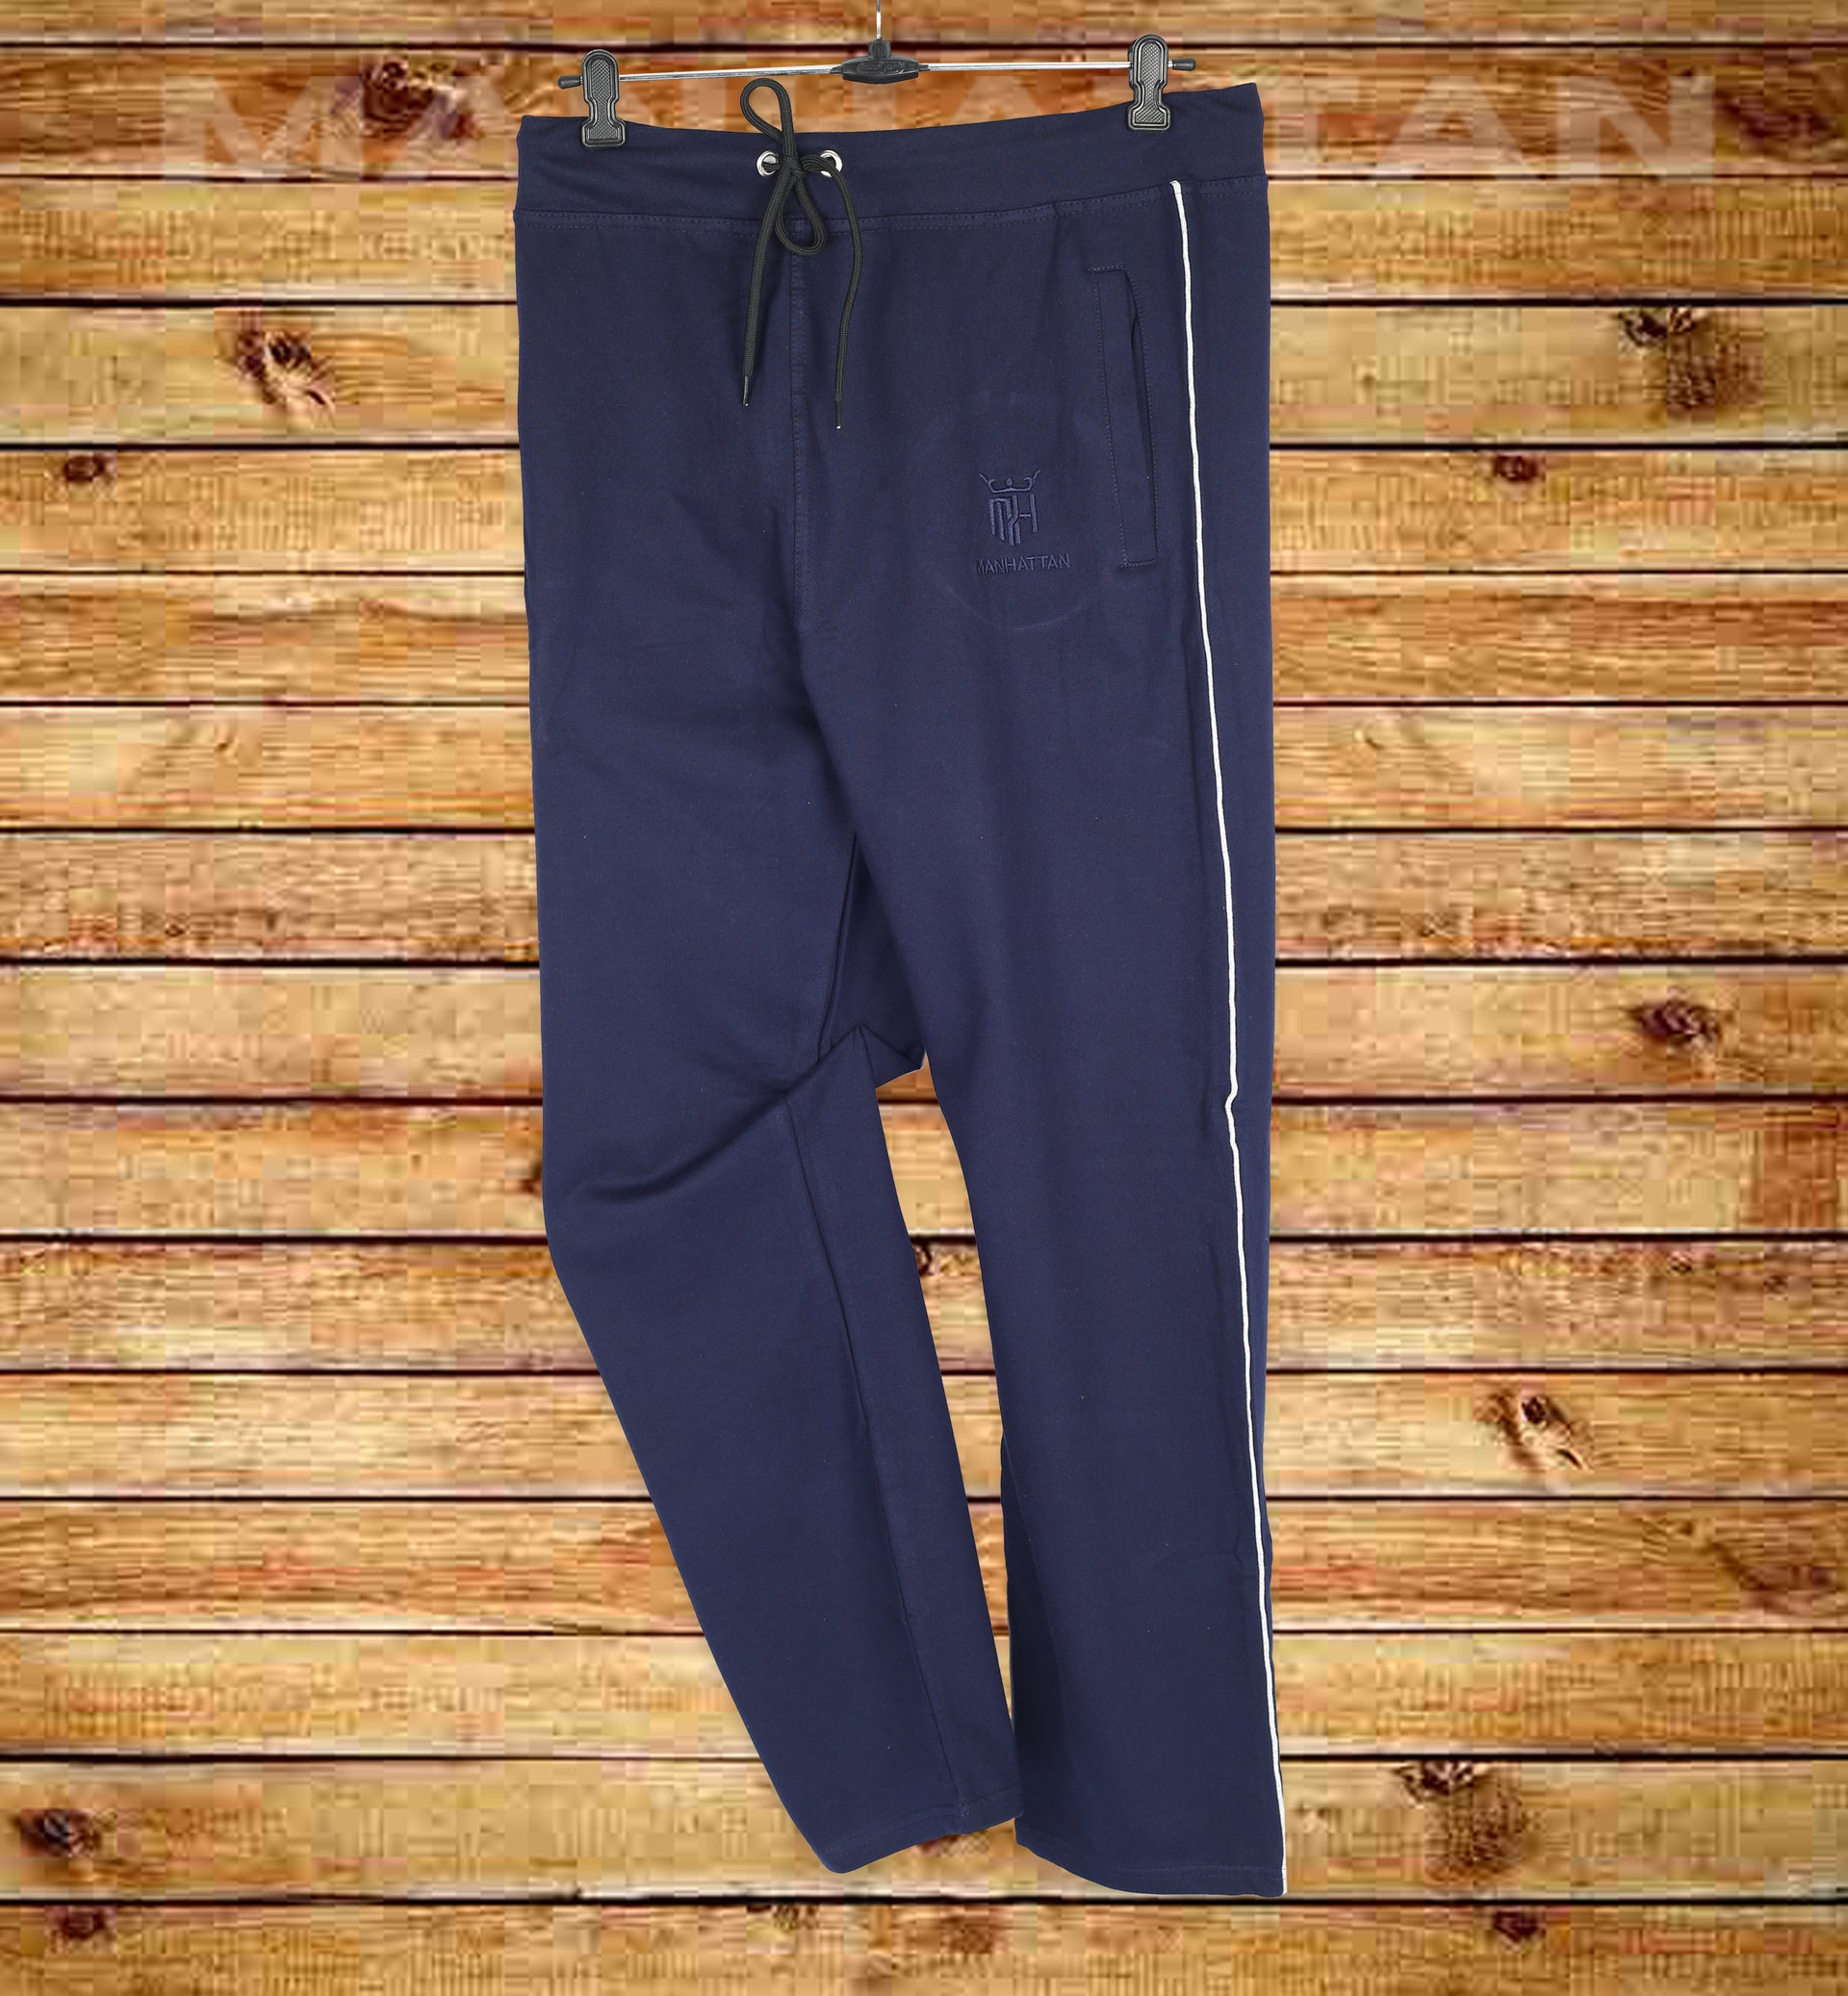 Cotton Navy Blue Track Pant, Size: S - XL at Rs 300/piece in Jhajjar